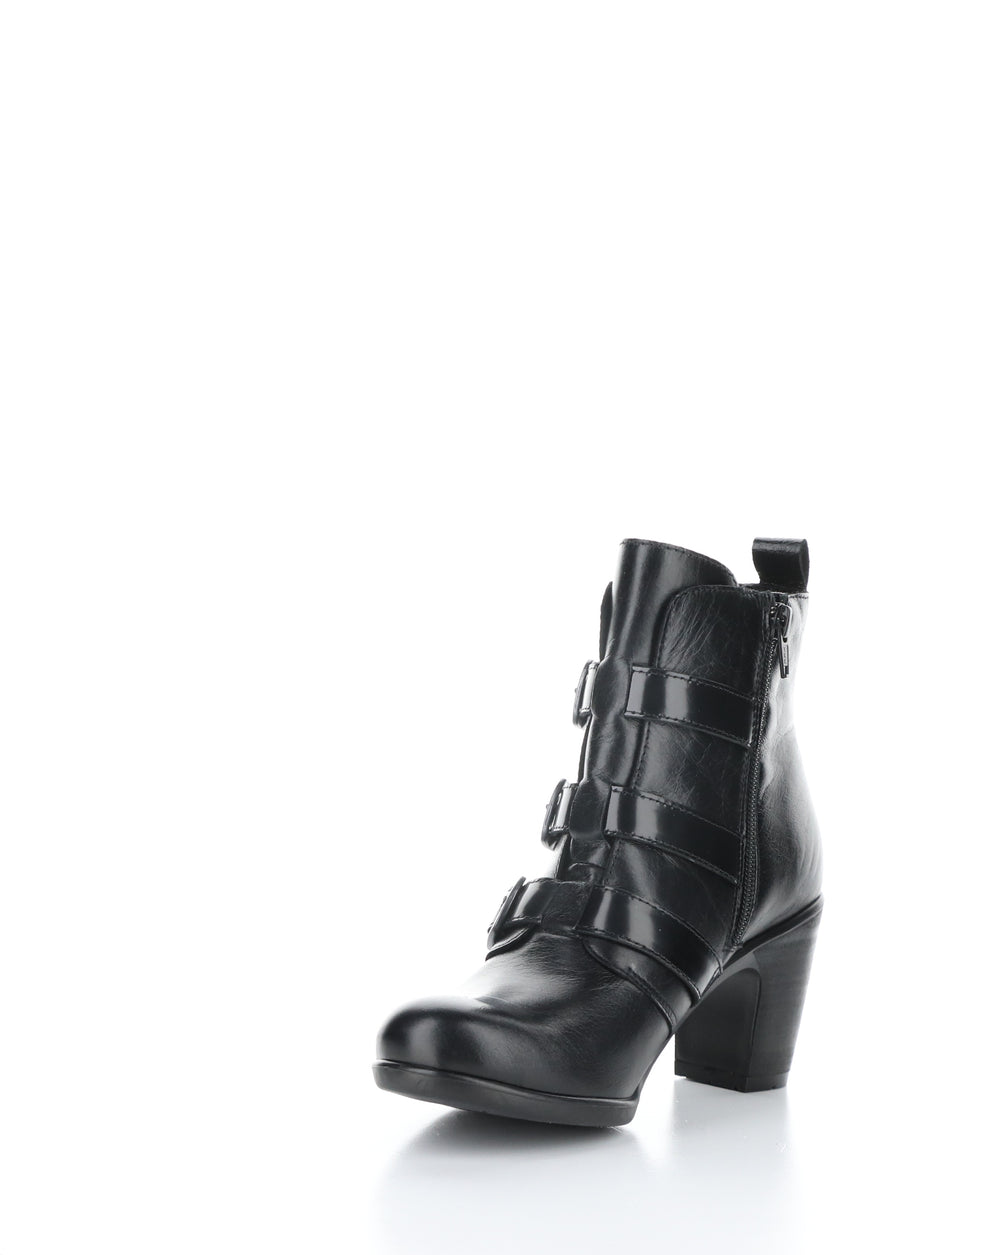 KLEA012FLY 000 BLACK Round Toe Boots